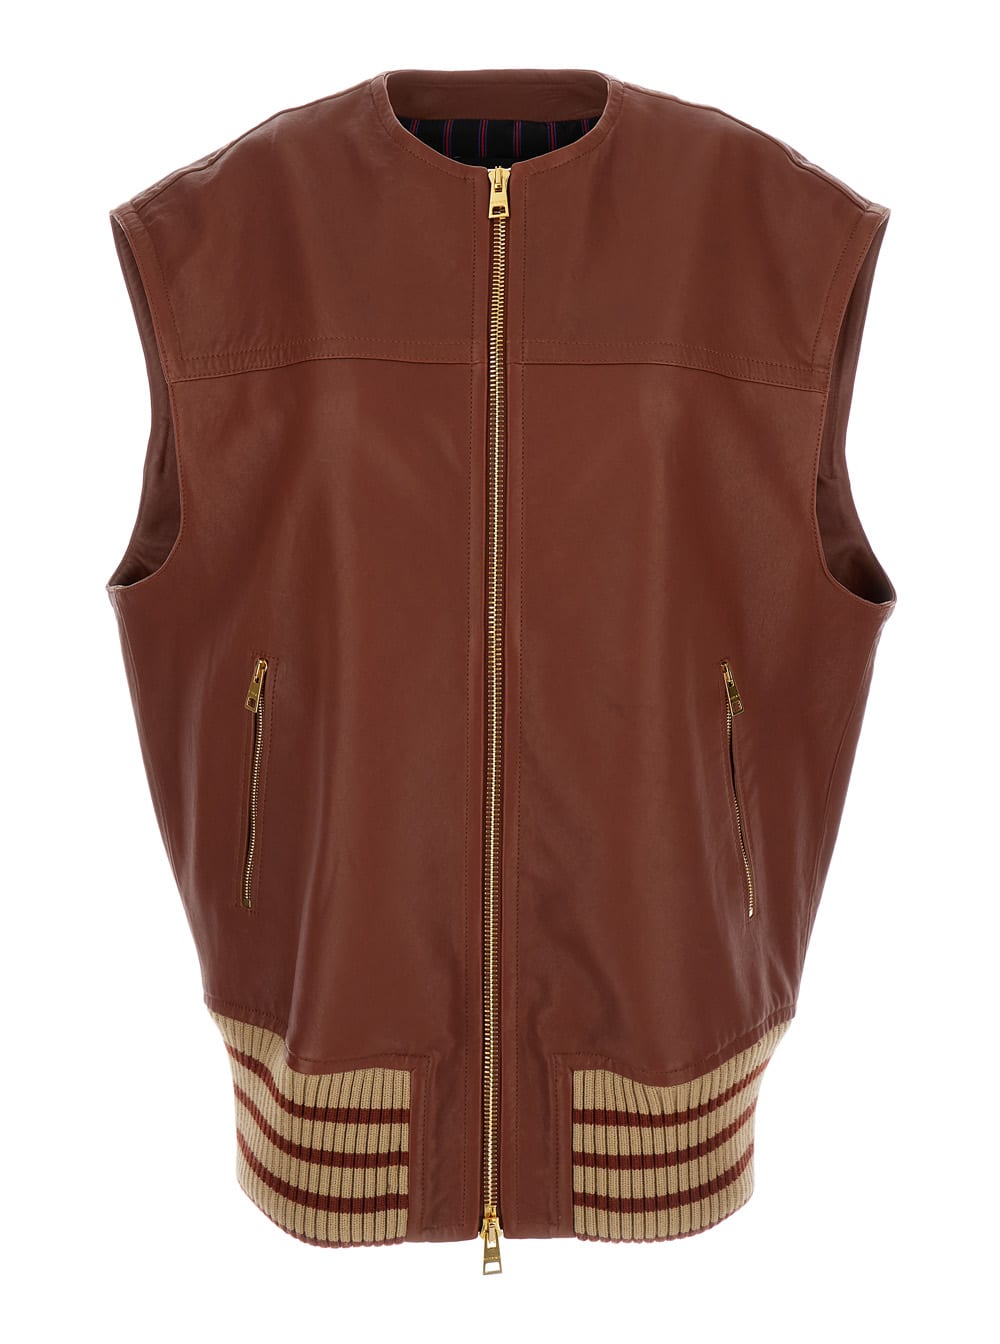 ETRO BROWN SLEEVELESS JACKET WITH REAR PRINTED IN LEATHER WOMAN